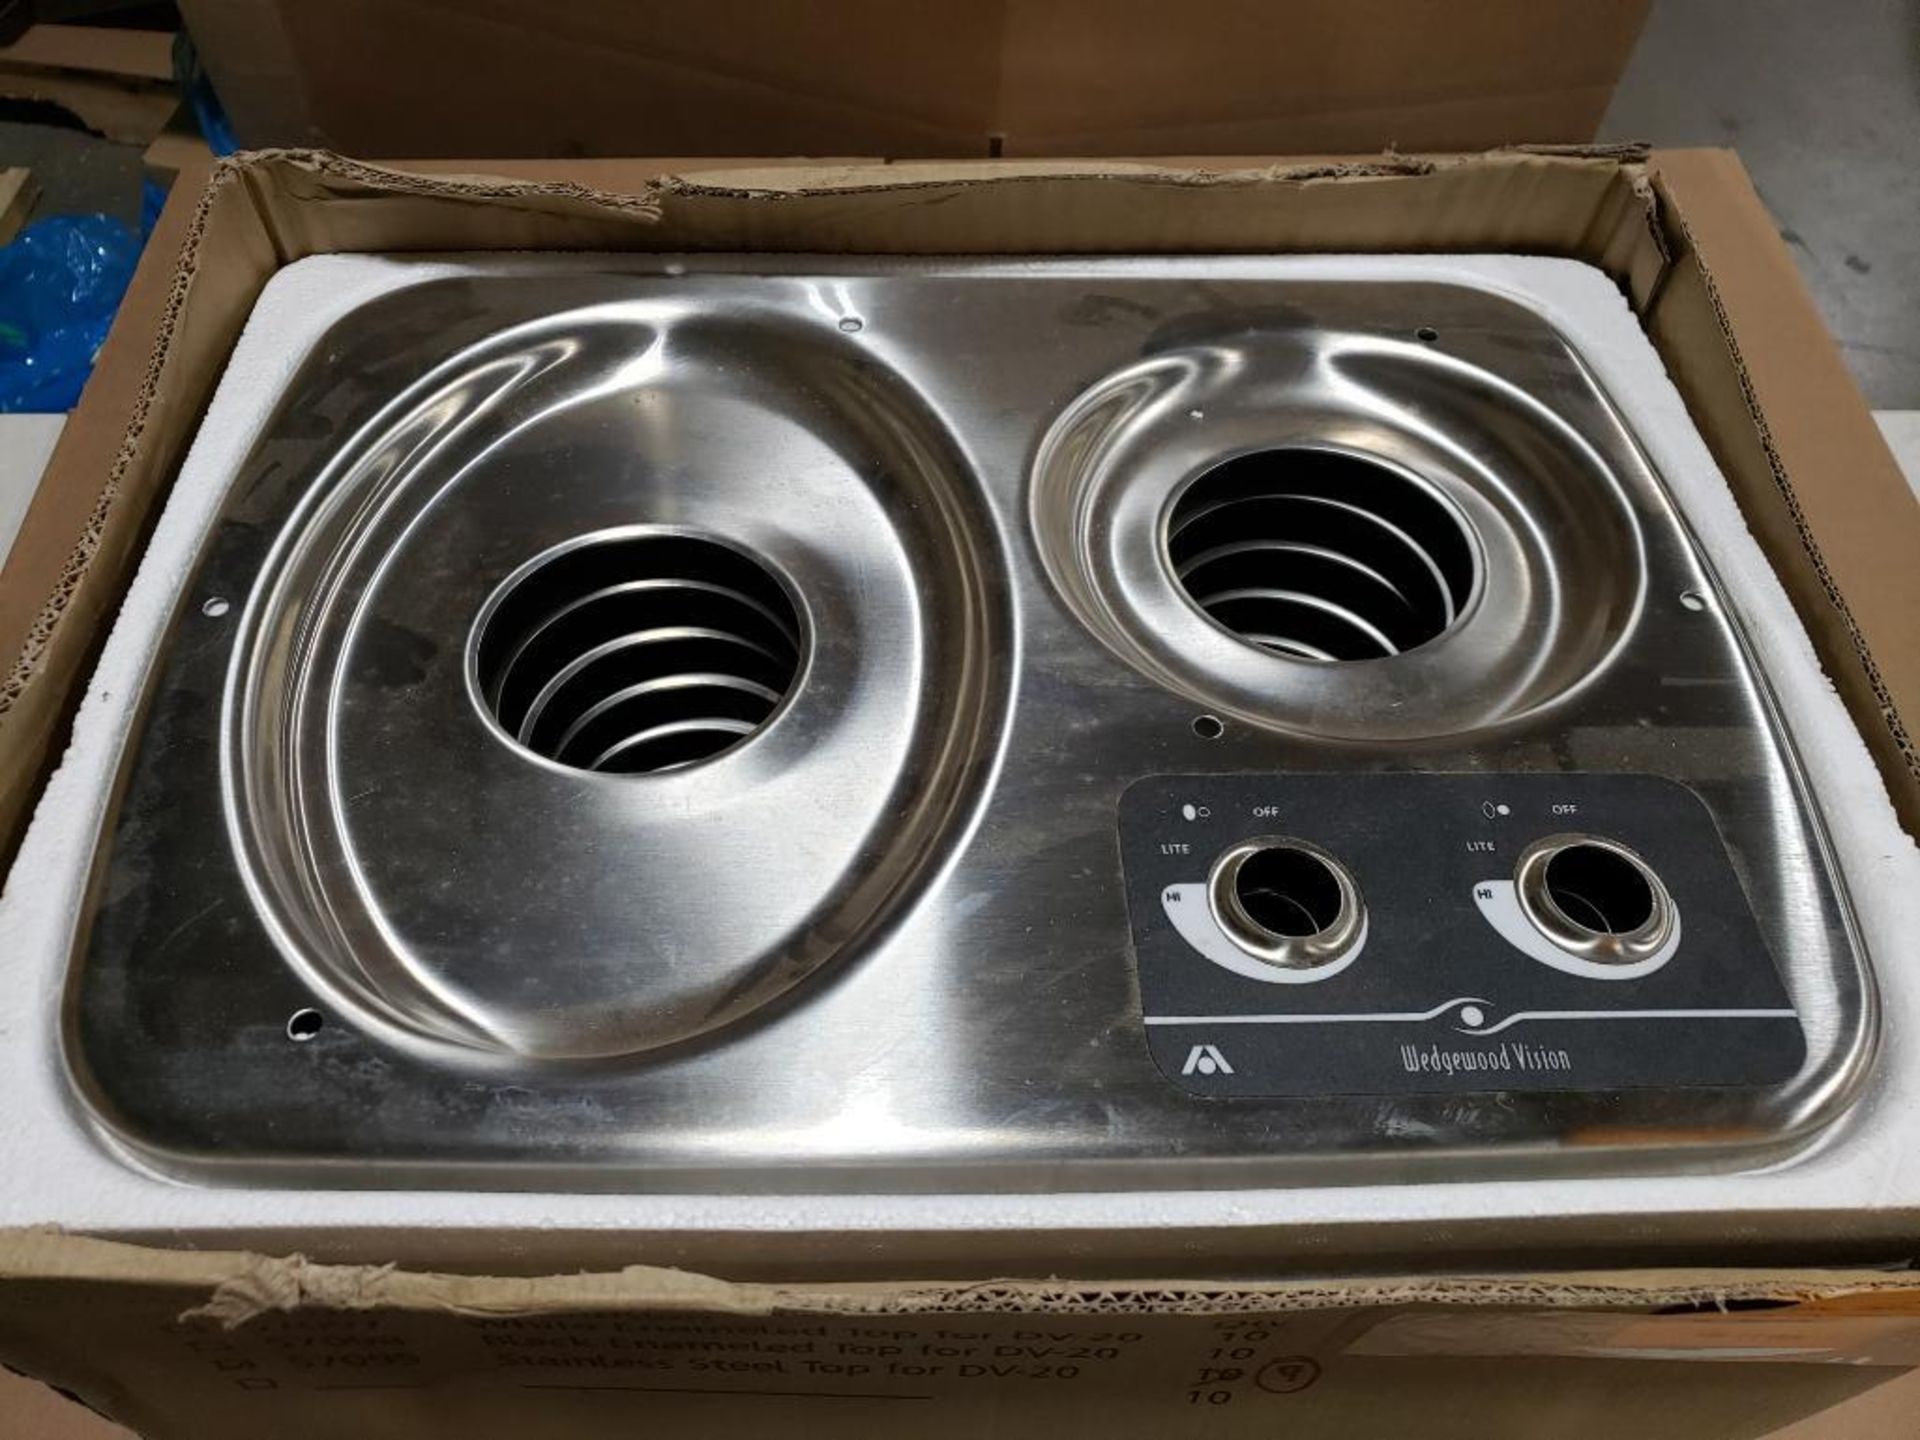 Qty 9 - Atwood Wedgewood Vision cook top replacement stainless tops. Part number 57099. - Image 2 of 7